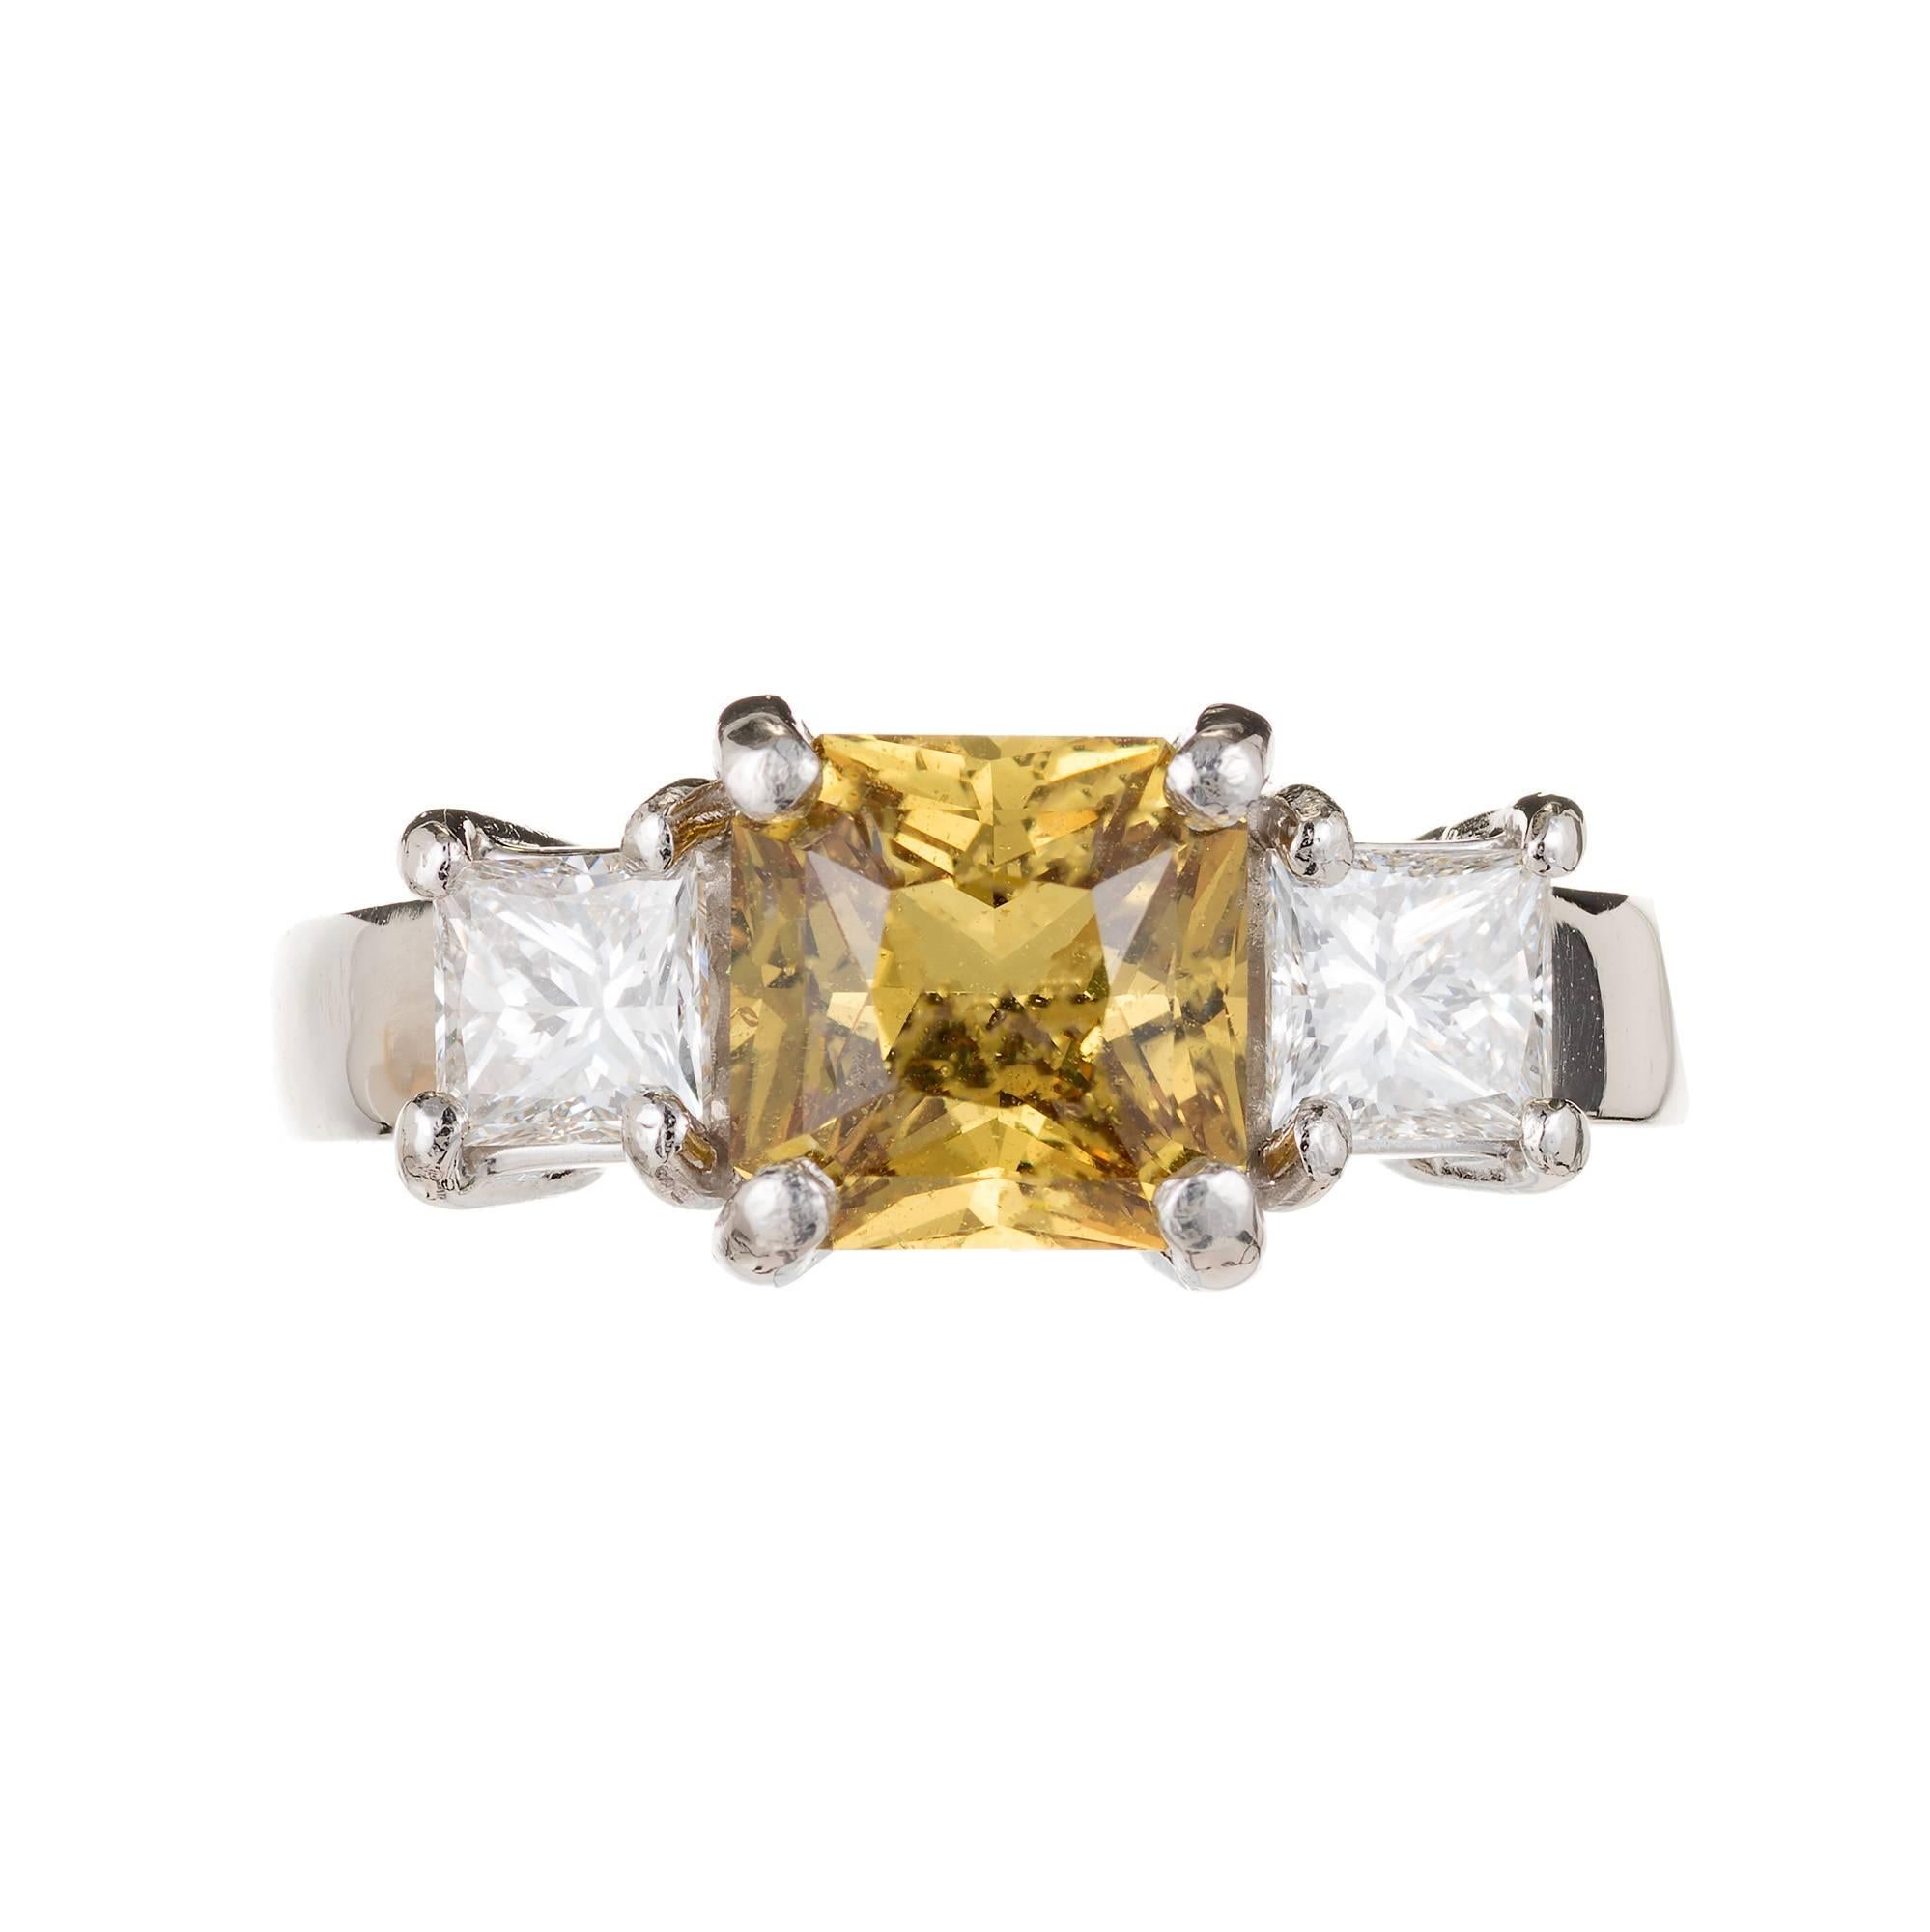 Peter Suchy GIA Certified bright golden yellow natural octagonal step cut 2.32 carat sapphire engagement ring. Two princess cut side diamonds in a platinum setting.

1 Octagonal Yellow Sapphire SI approximate 2.32 carats. GIA Certificate#